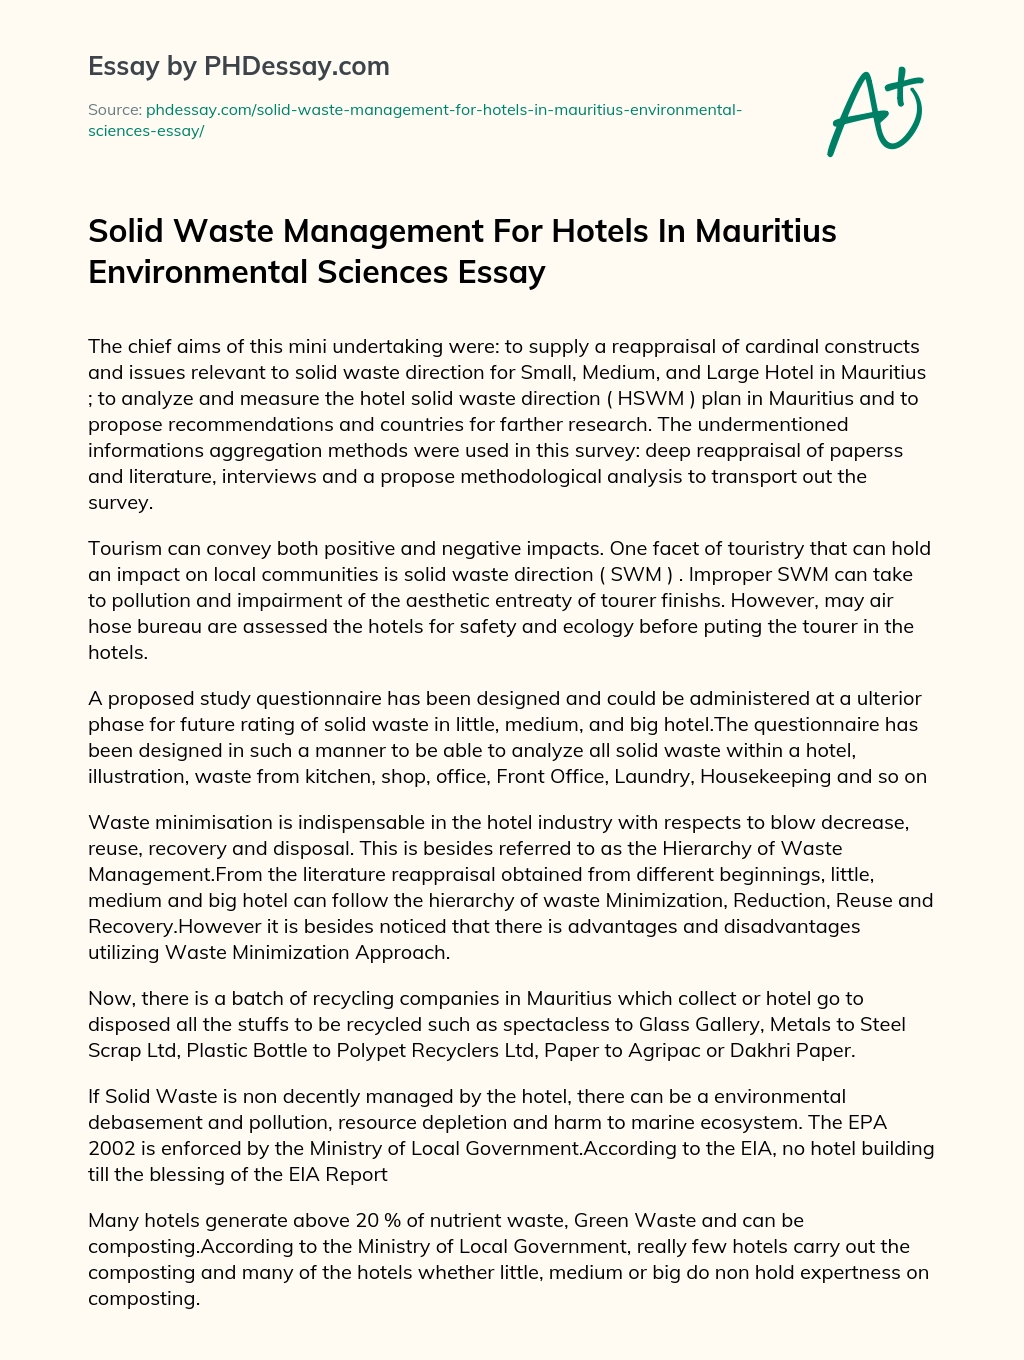 Solid Waste Management For Hotels In Mauritius Environmental Sciences Essay essay